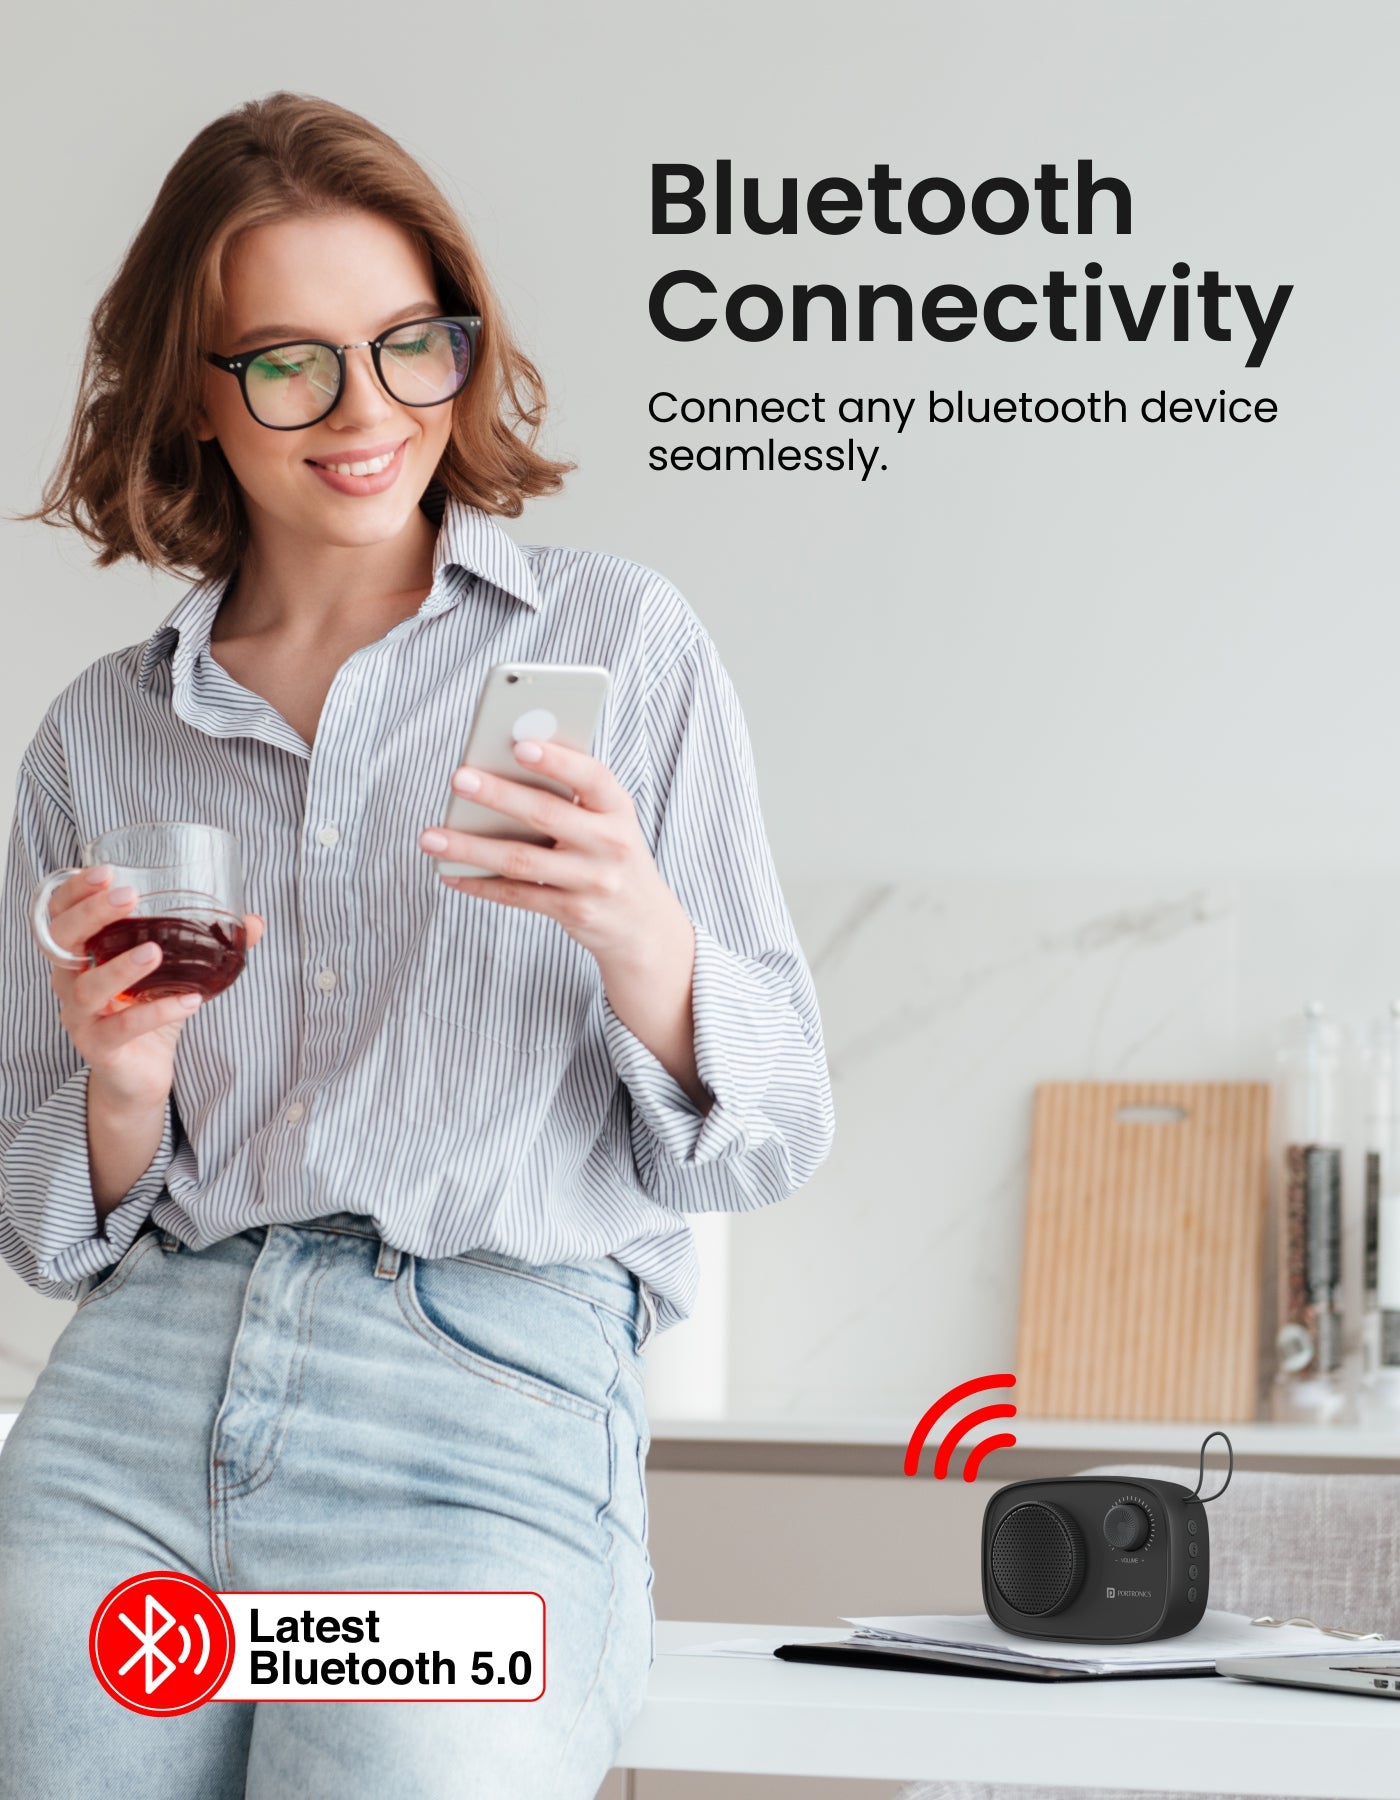 Portronics Pixel 2  Portable Wireless Bluetooth Speaker 3W with Volume Knob fast connect with bluetooth streamlessly